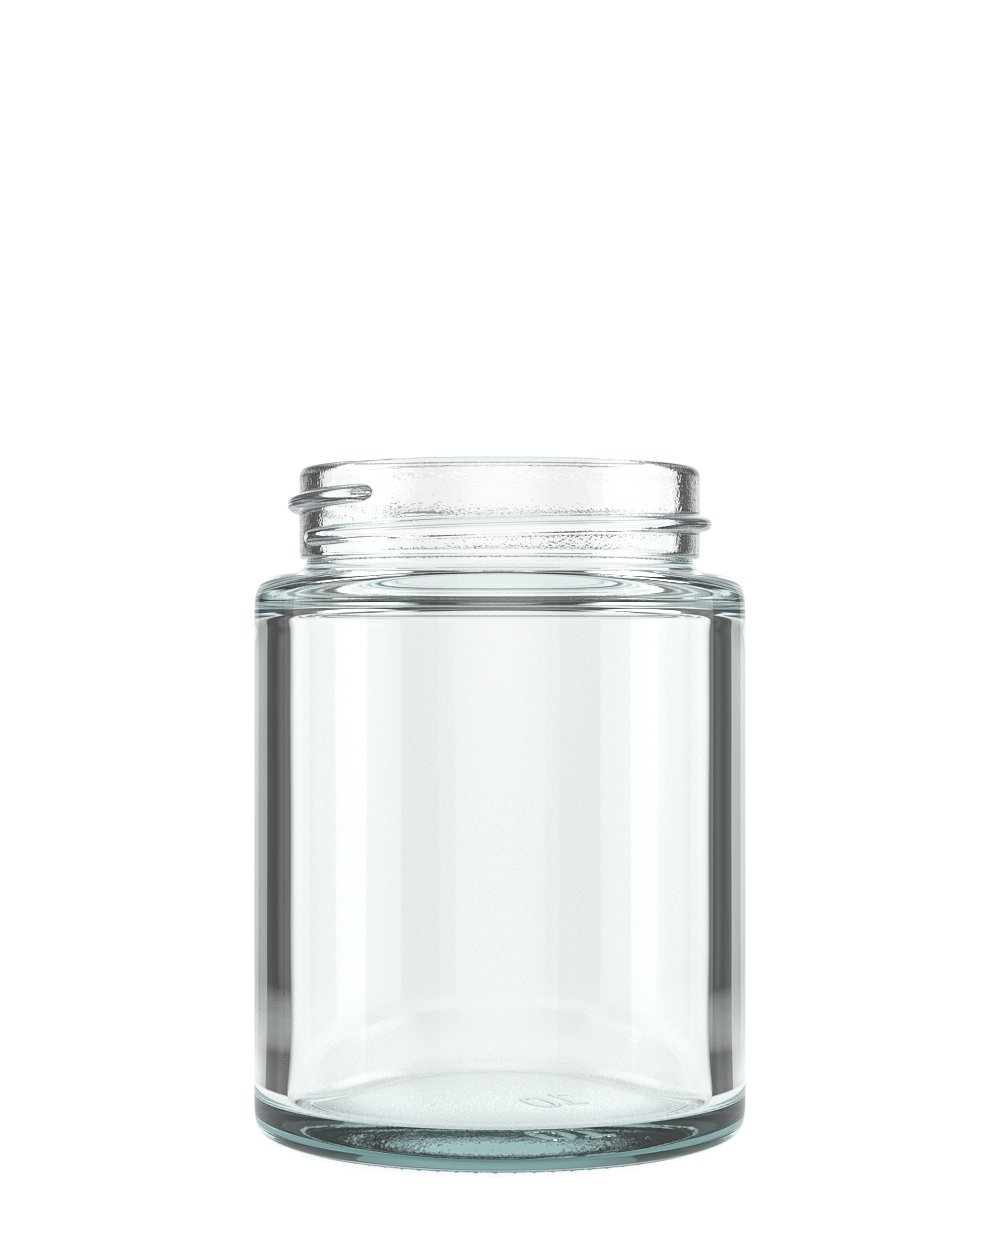 Child Resistant | Straight Sided Clear Glass Jars with Black Cap | 50mm - 4oz - 100 Count - 2